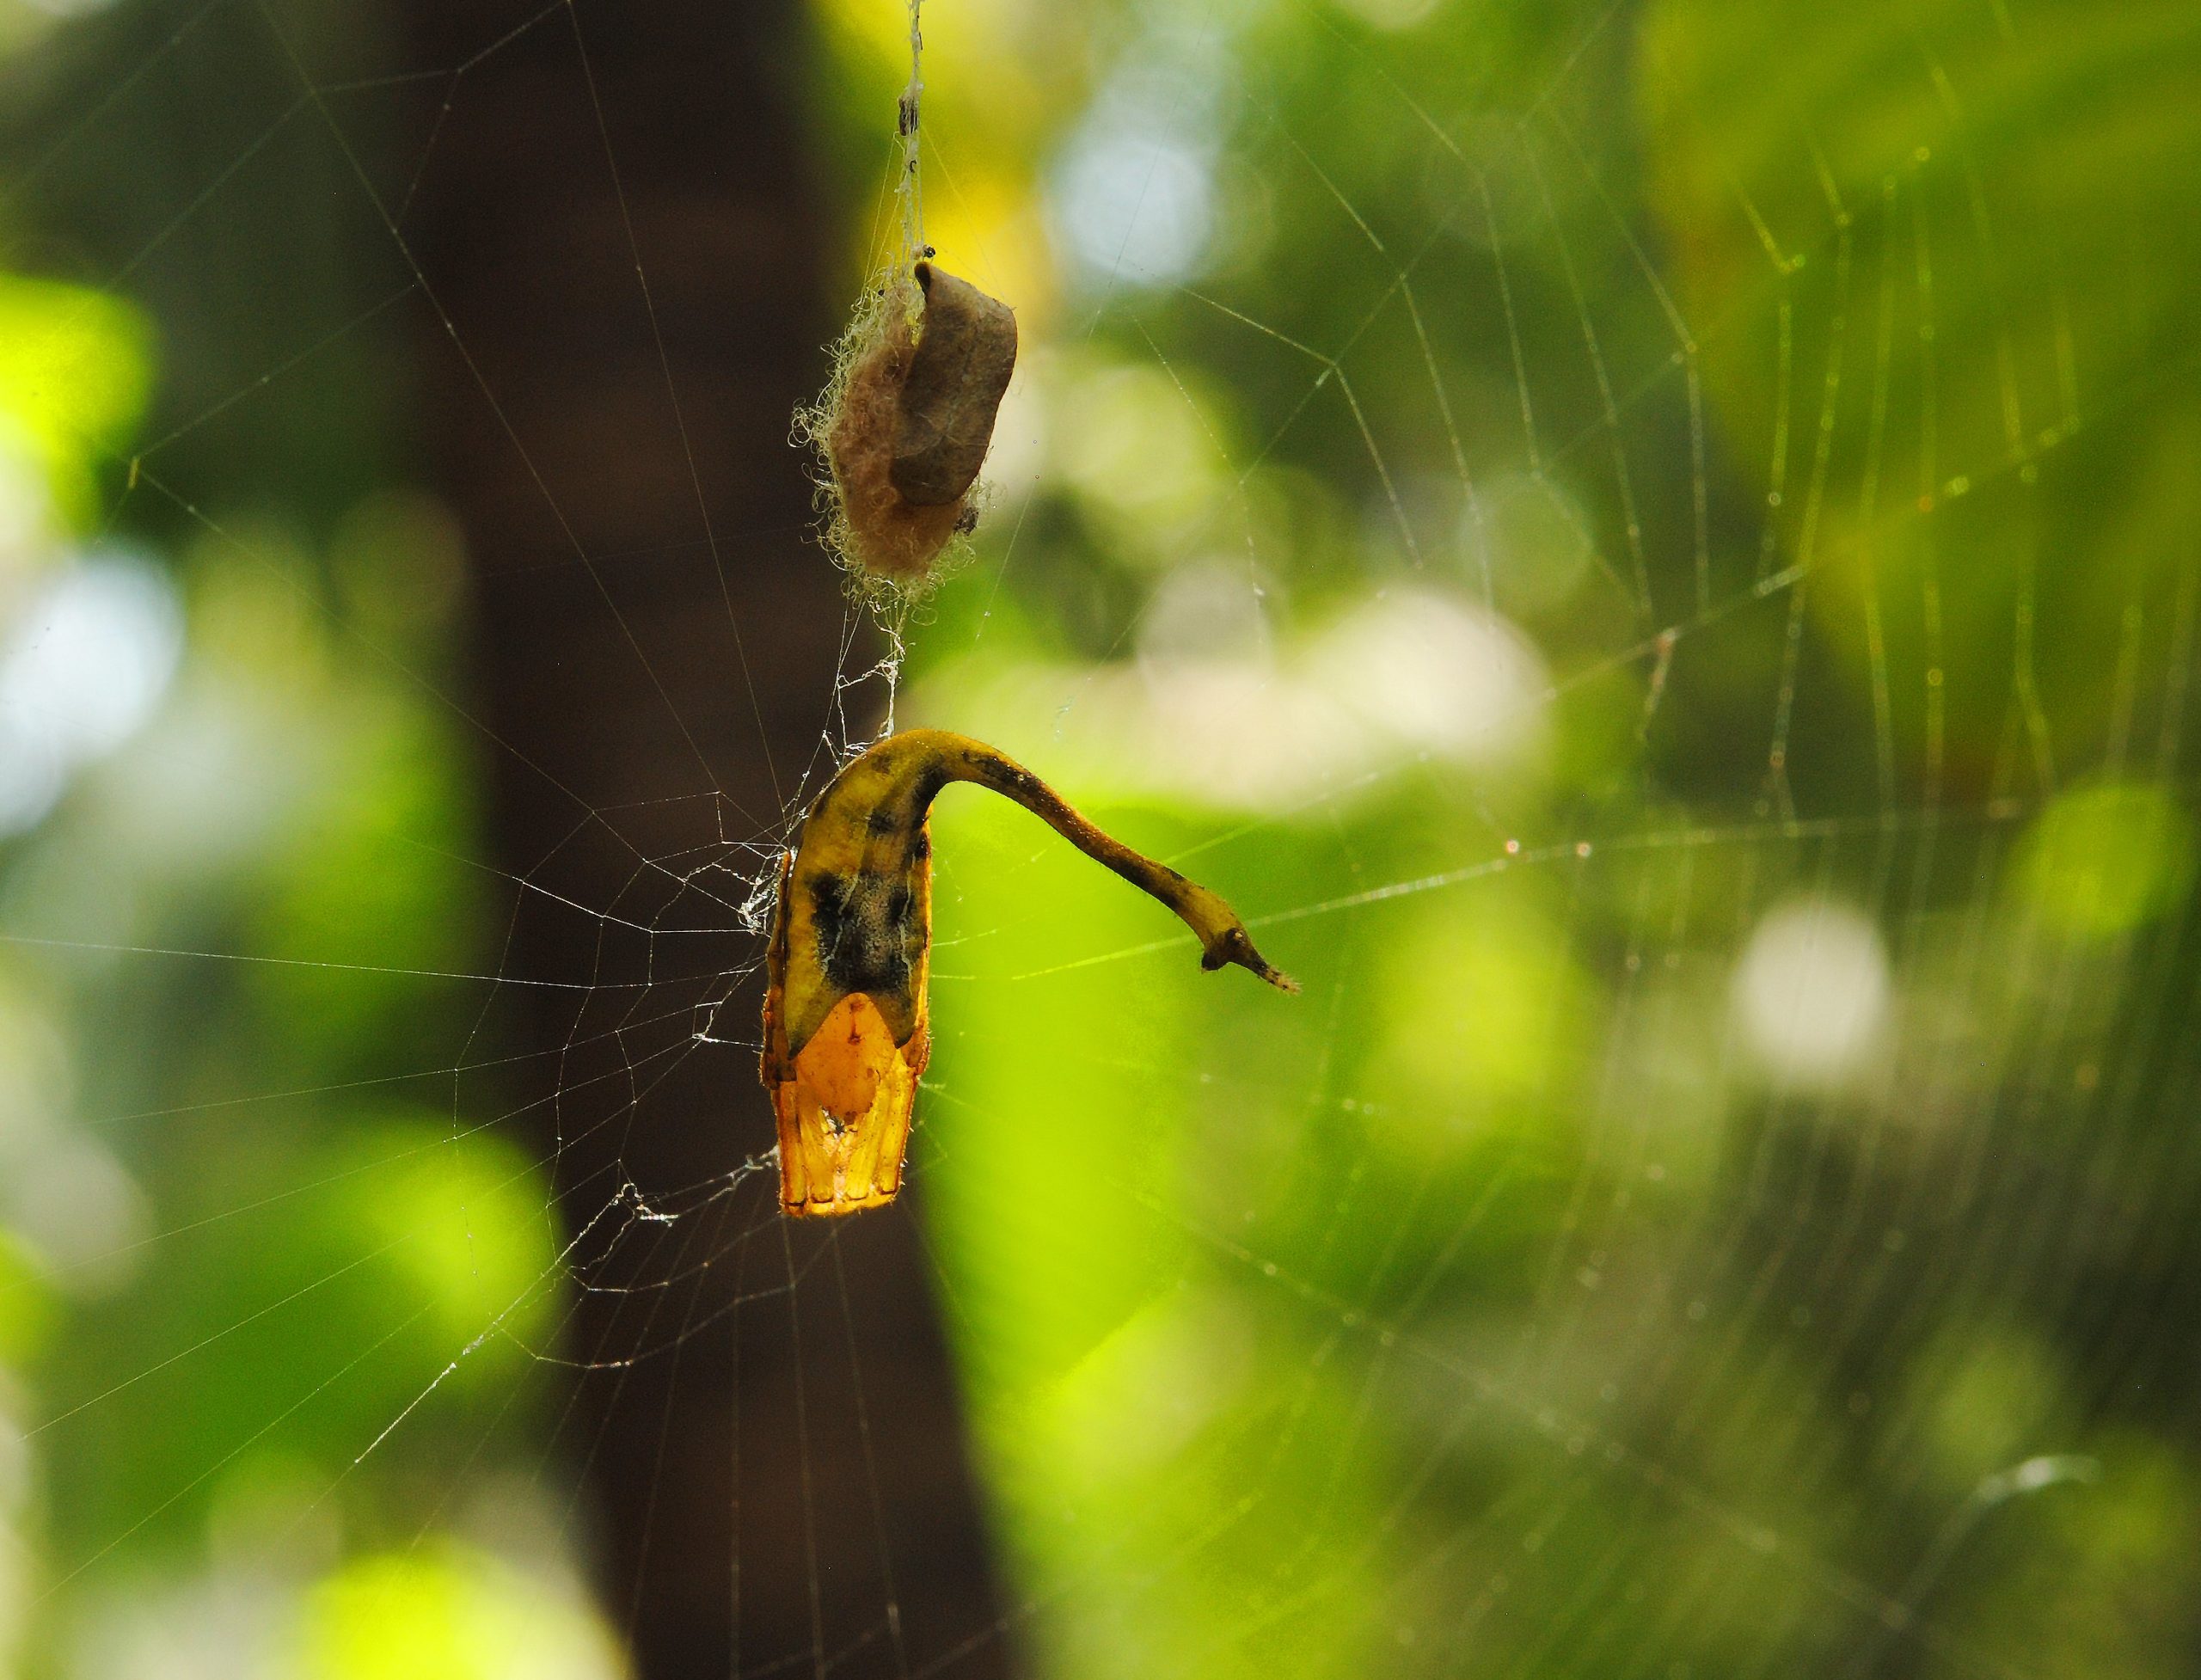 A yellow orbweaver in her web under an egg sac